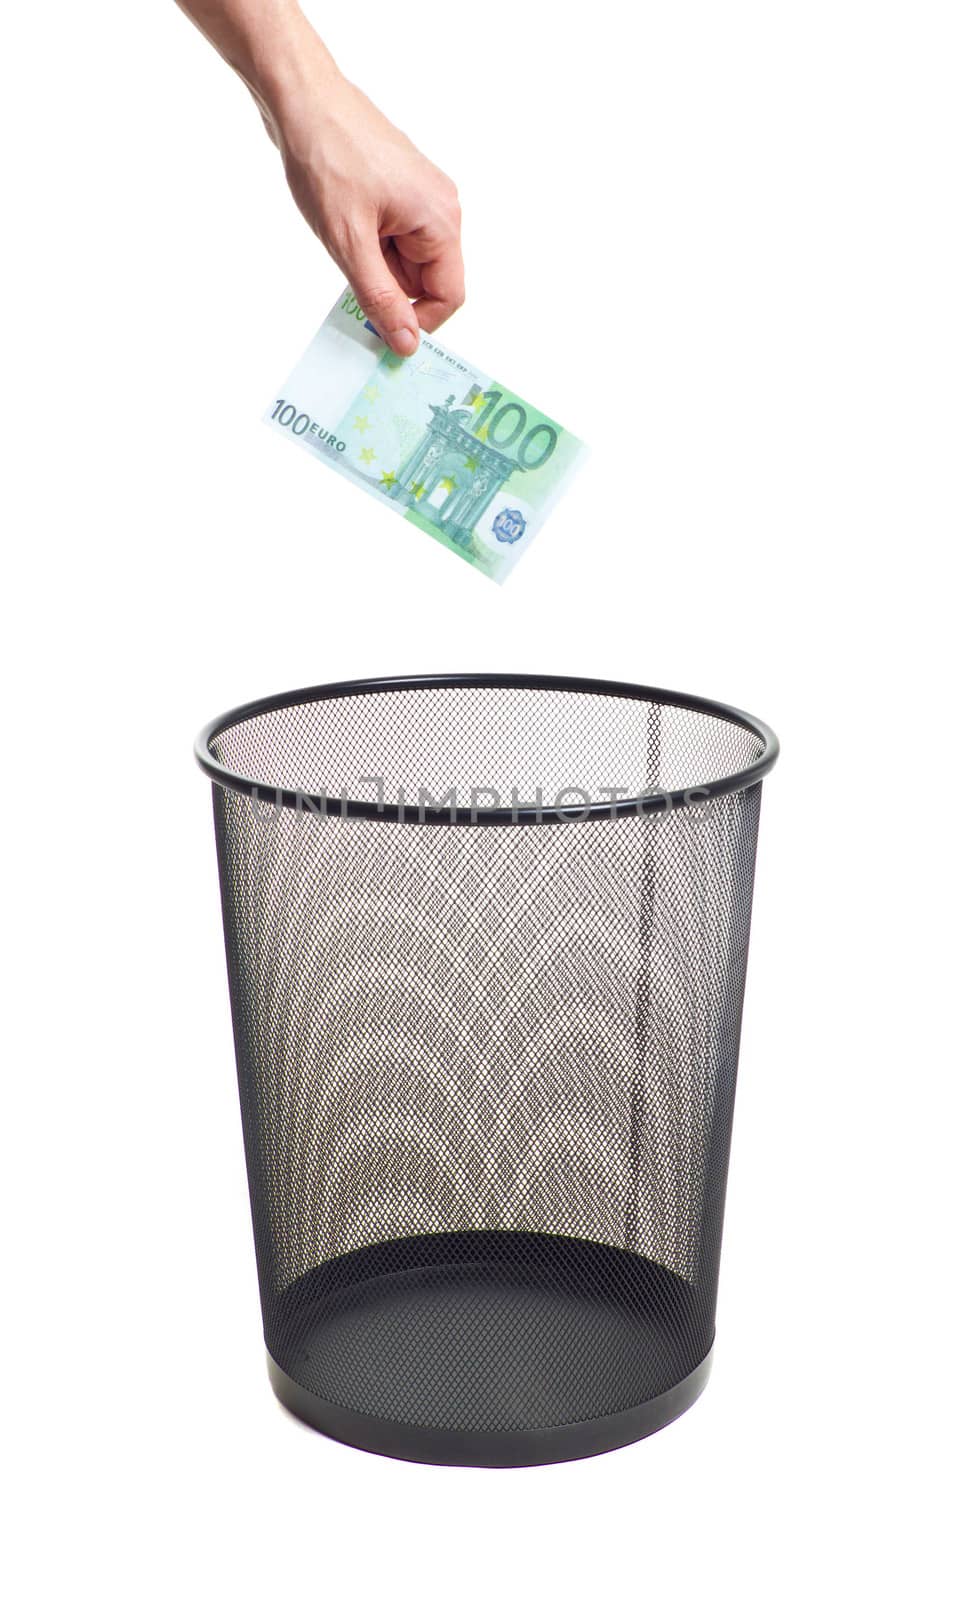 hand gold euro to trash can